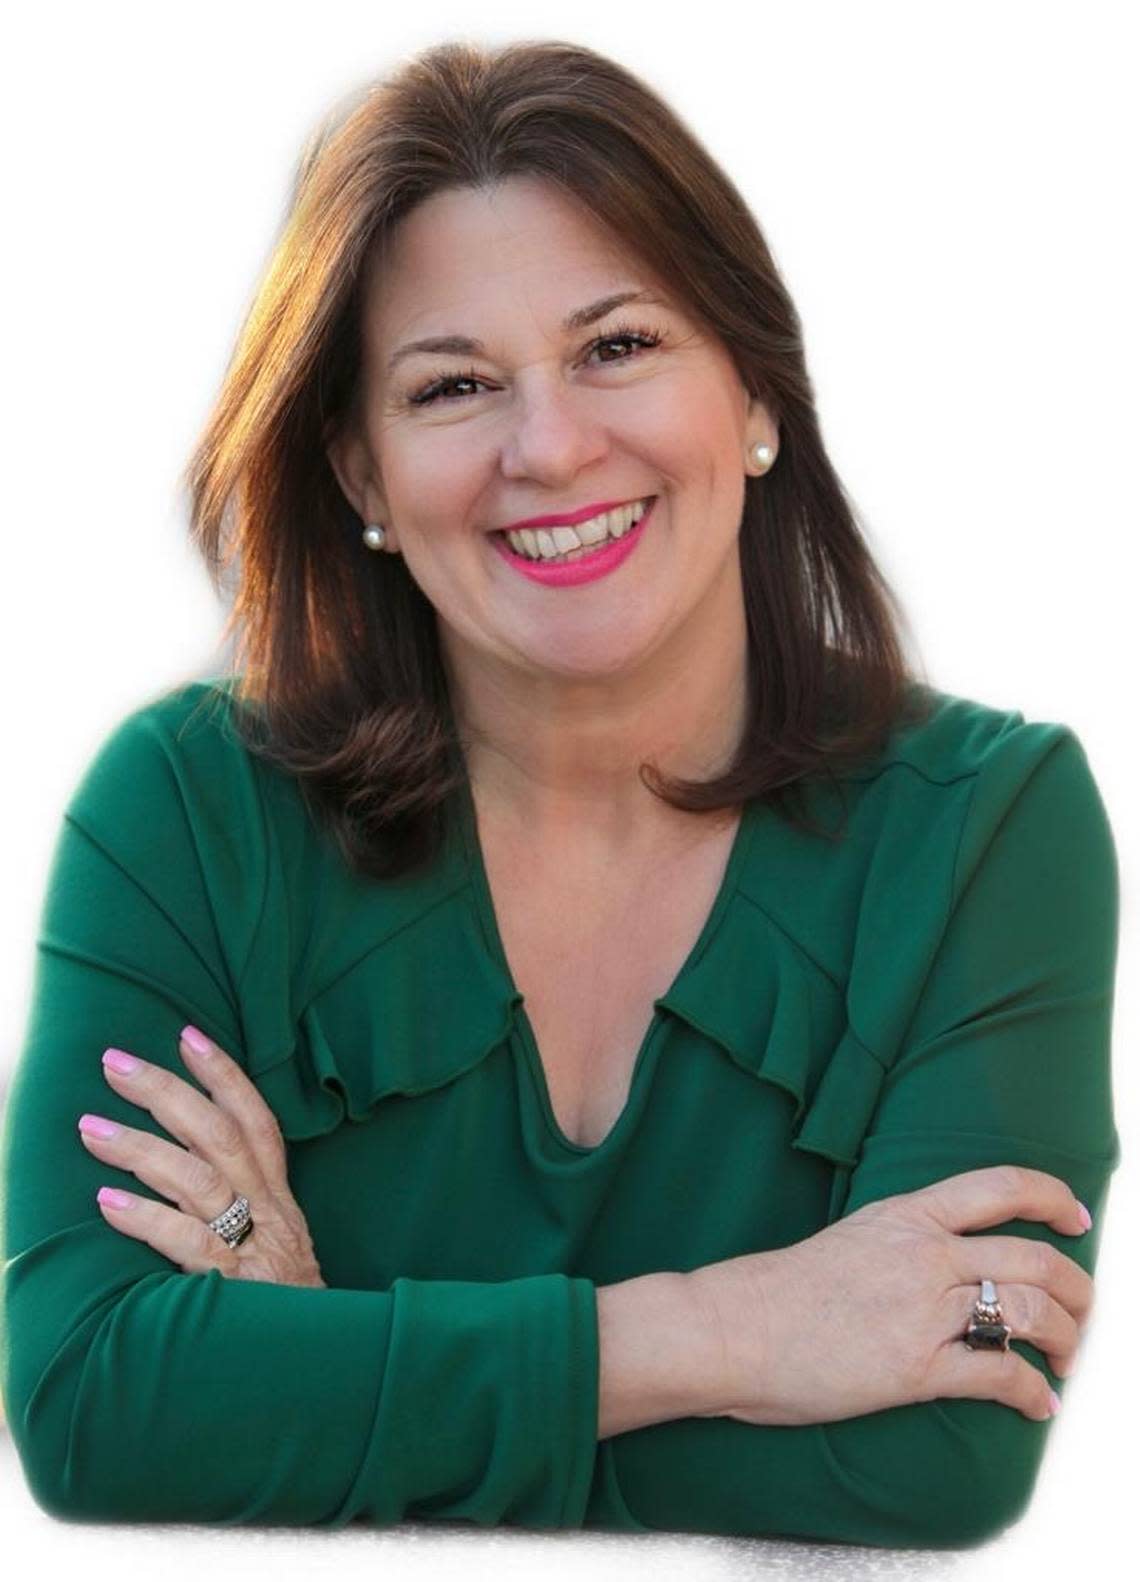 Vivian Casáls-Muñoz is a politician with more than 13 years of experience as a councilwoman in the city of Hialeah. She currently serves as interim councilor and is running to finish the term vacated by Oscar De La Rosa, stepson of the mayor, Esteban Bovo Jr.